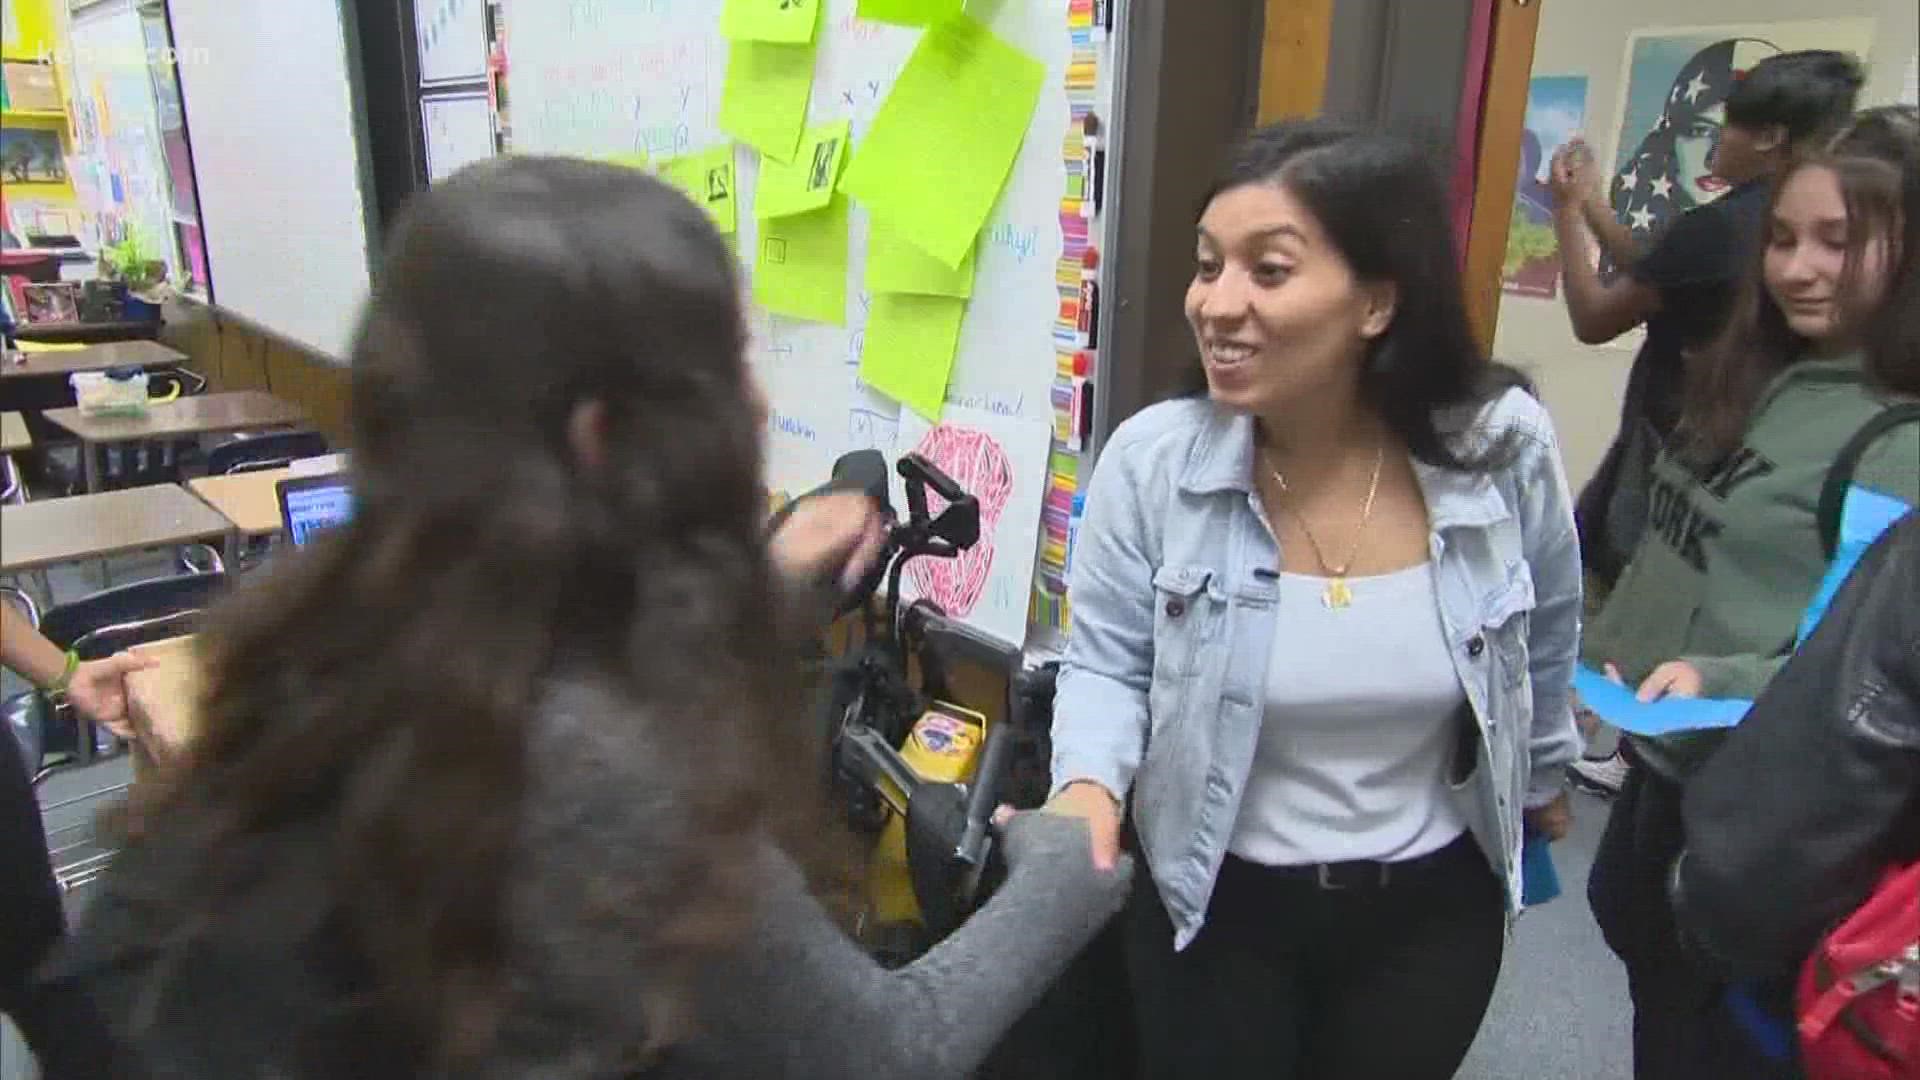 An SAISD teacher who previously won the KENS 5 EXCEL Award is up for a national award in Washington, D.C. We take a look back at her story and journey.